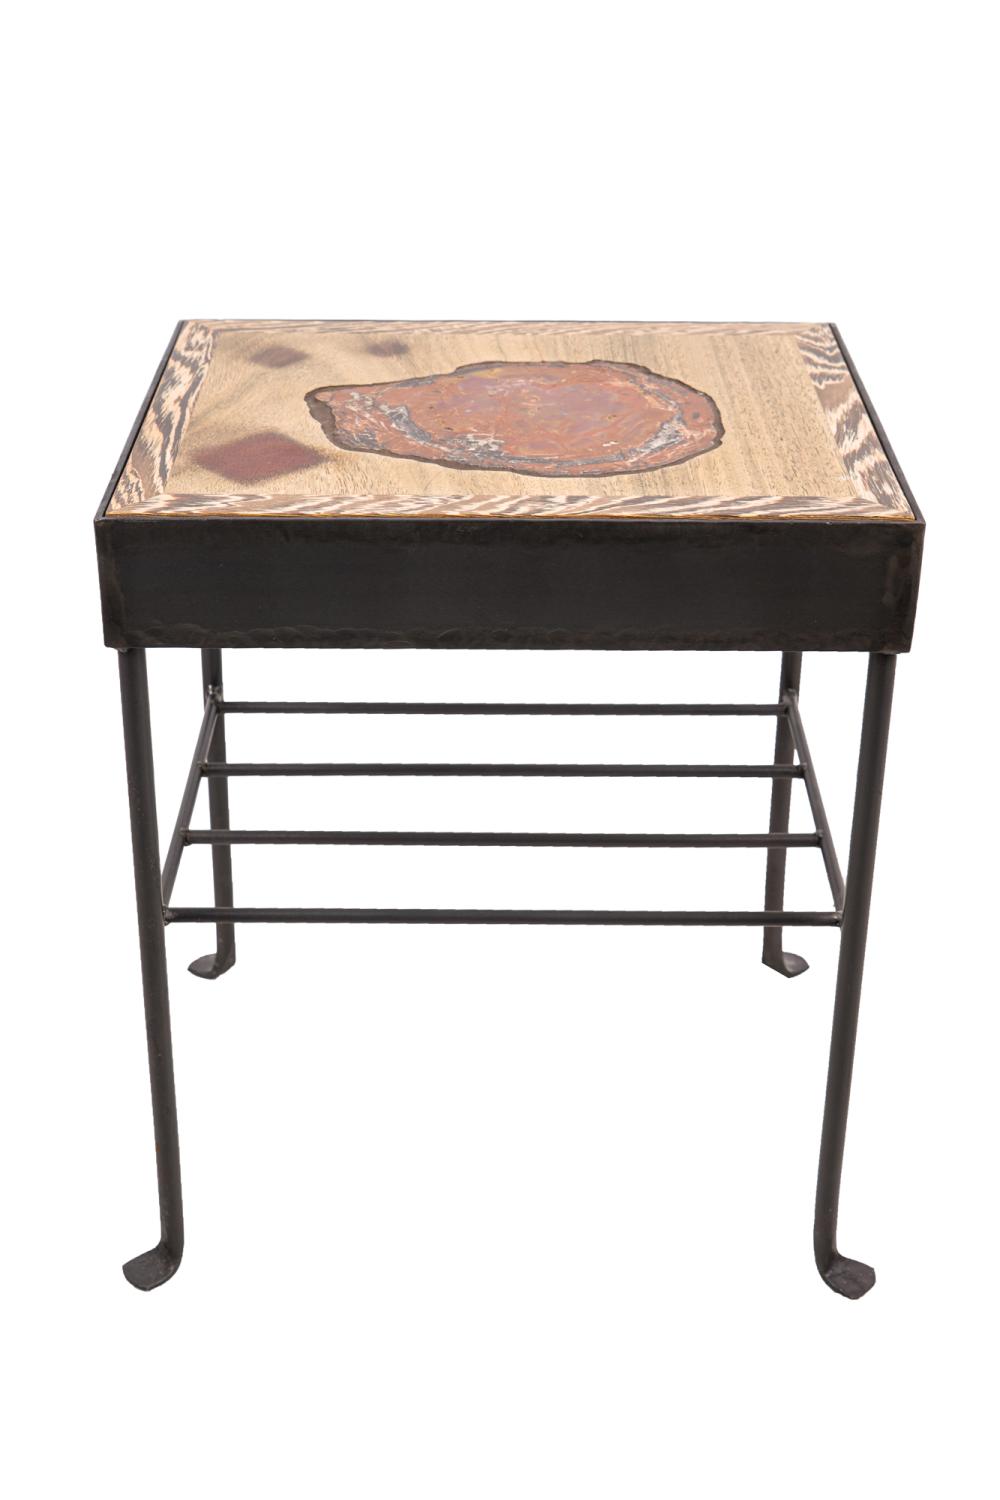 CHAJO SIDETABLE WITH FOSSIL TOPthe 3375e5